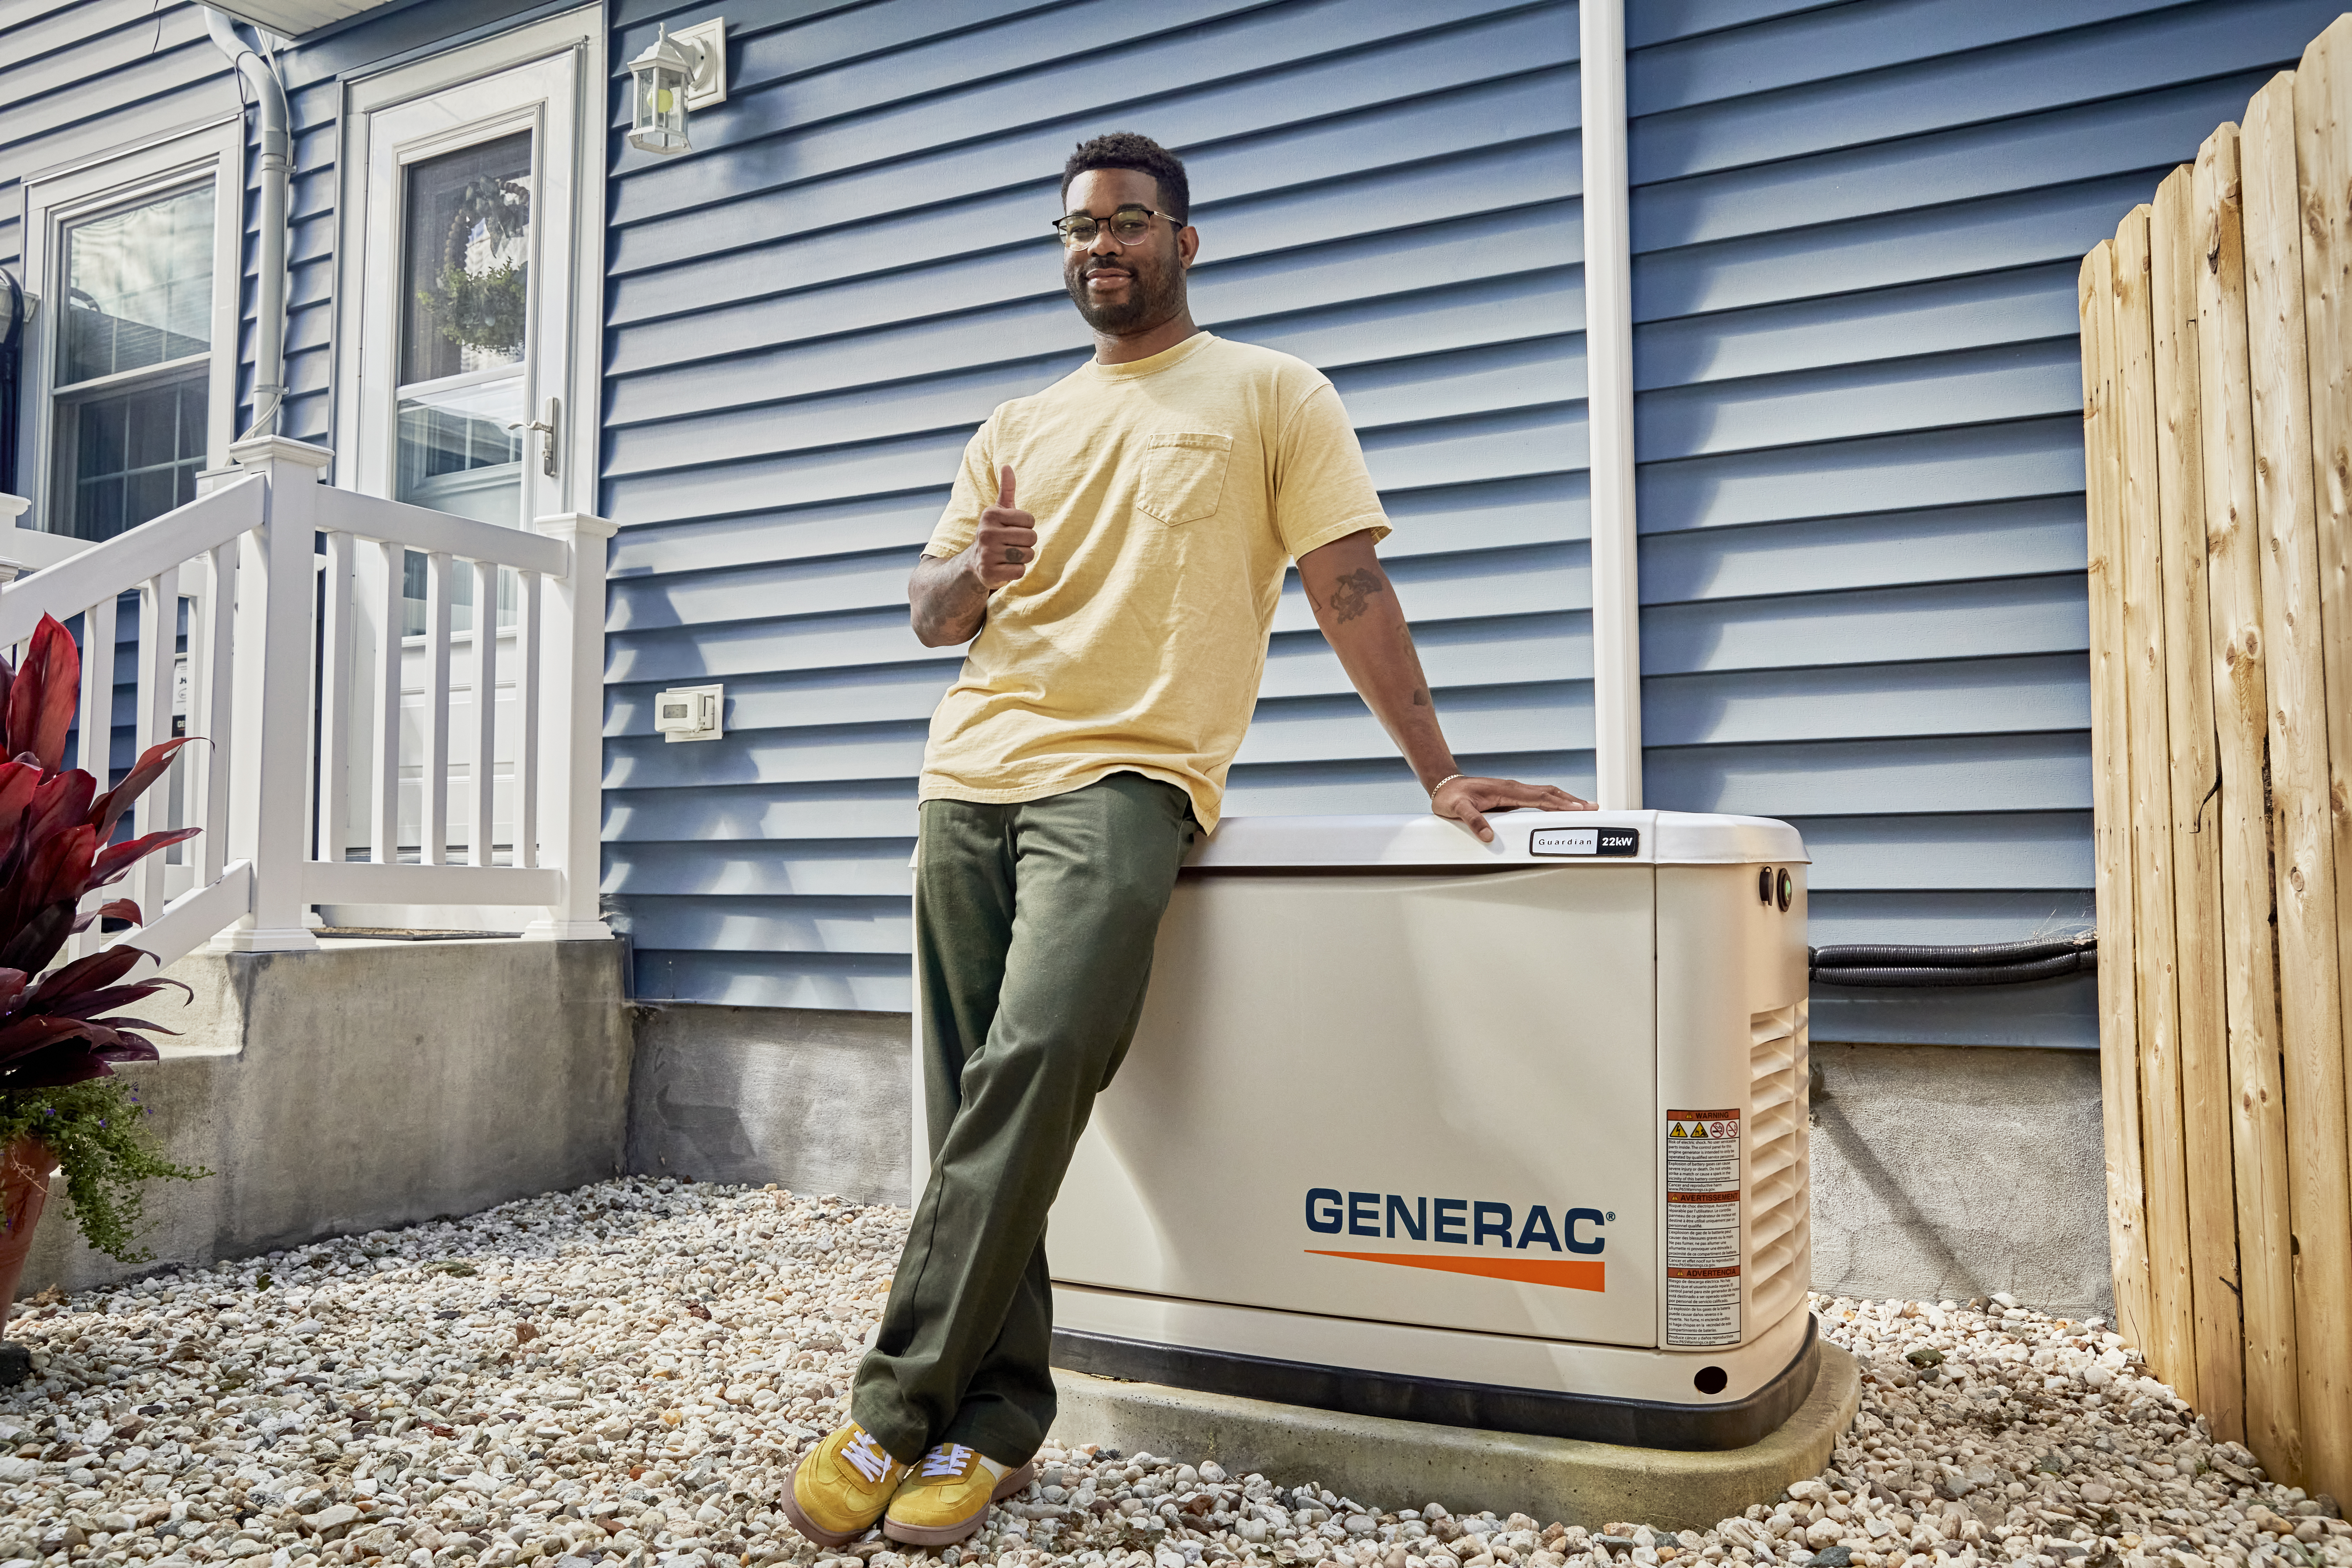 Generac generator being set up by an expert installer in a Cape Cod homeowner's backyard